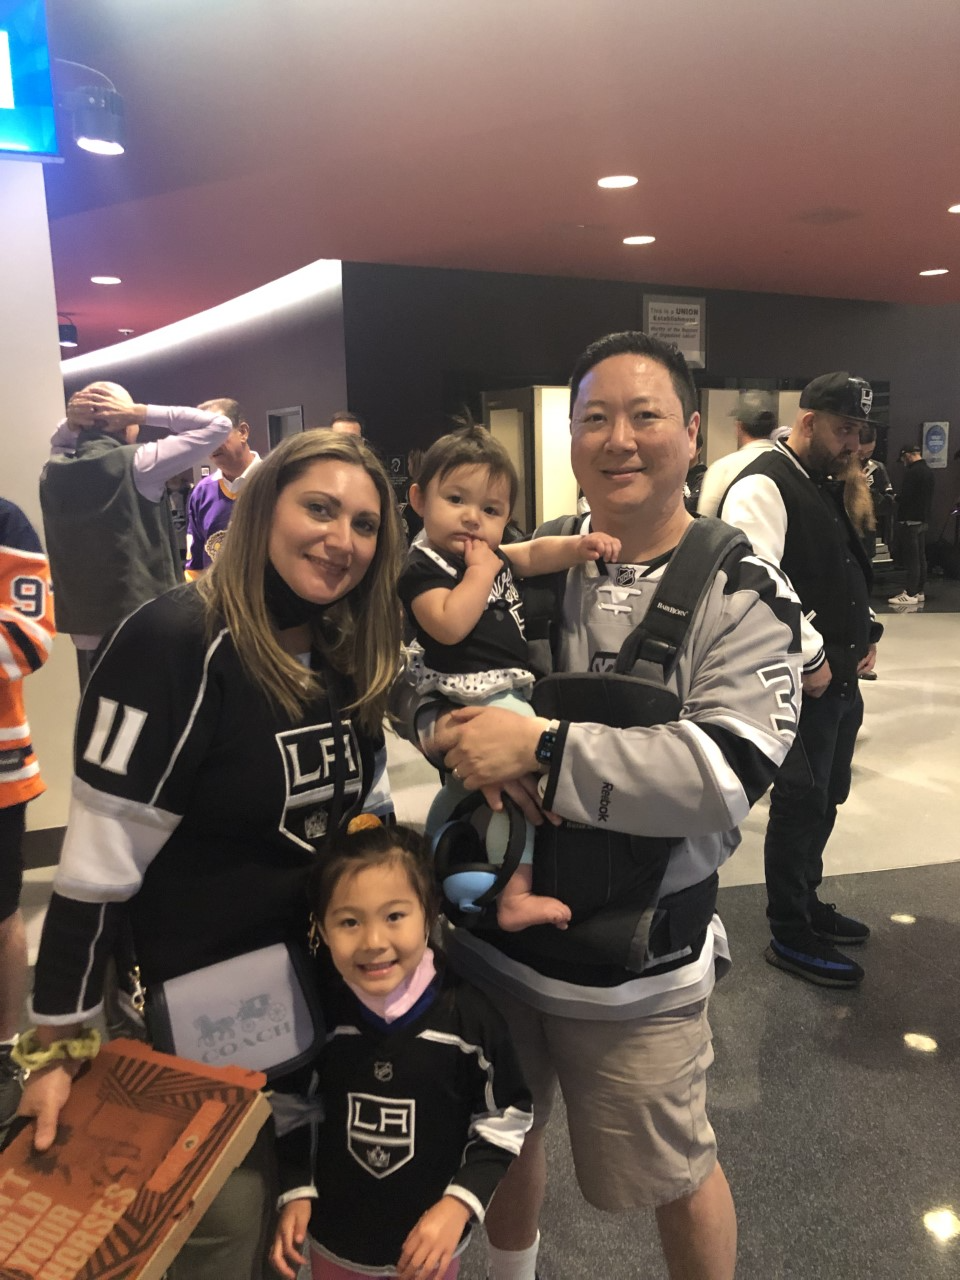 Kings fans Arthur Whang, his wife Lindsey and daughters Charlotte and Penelope.